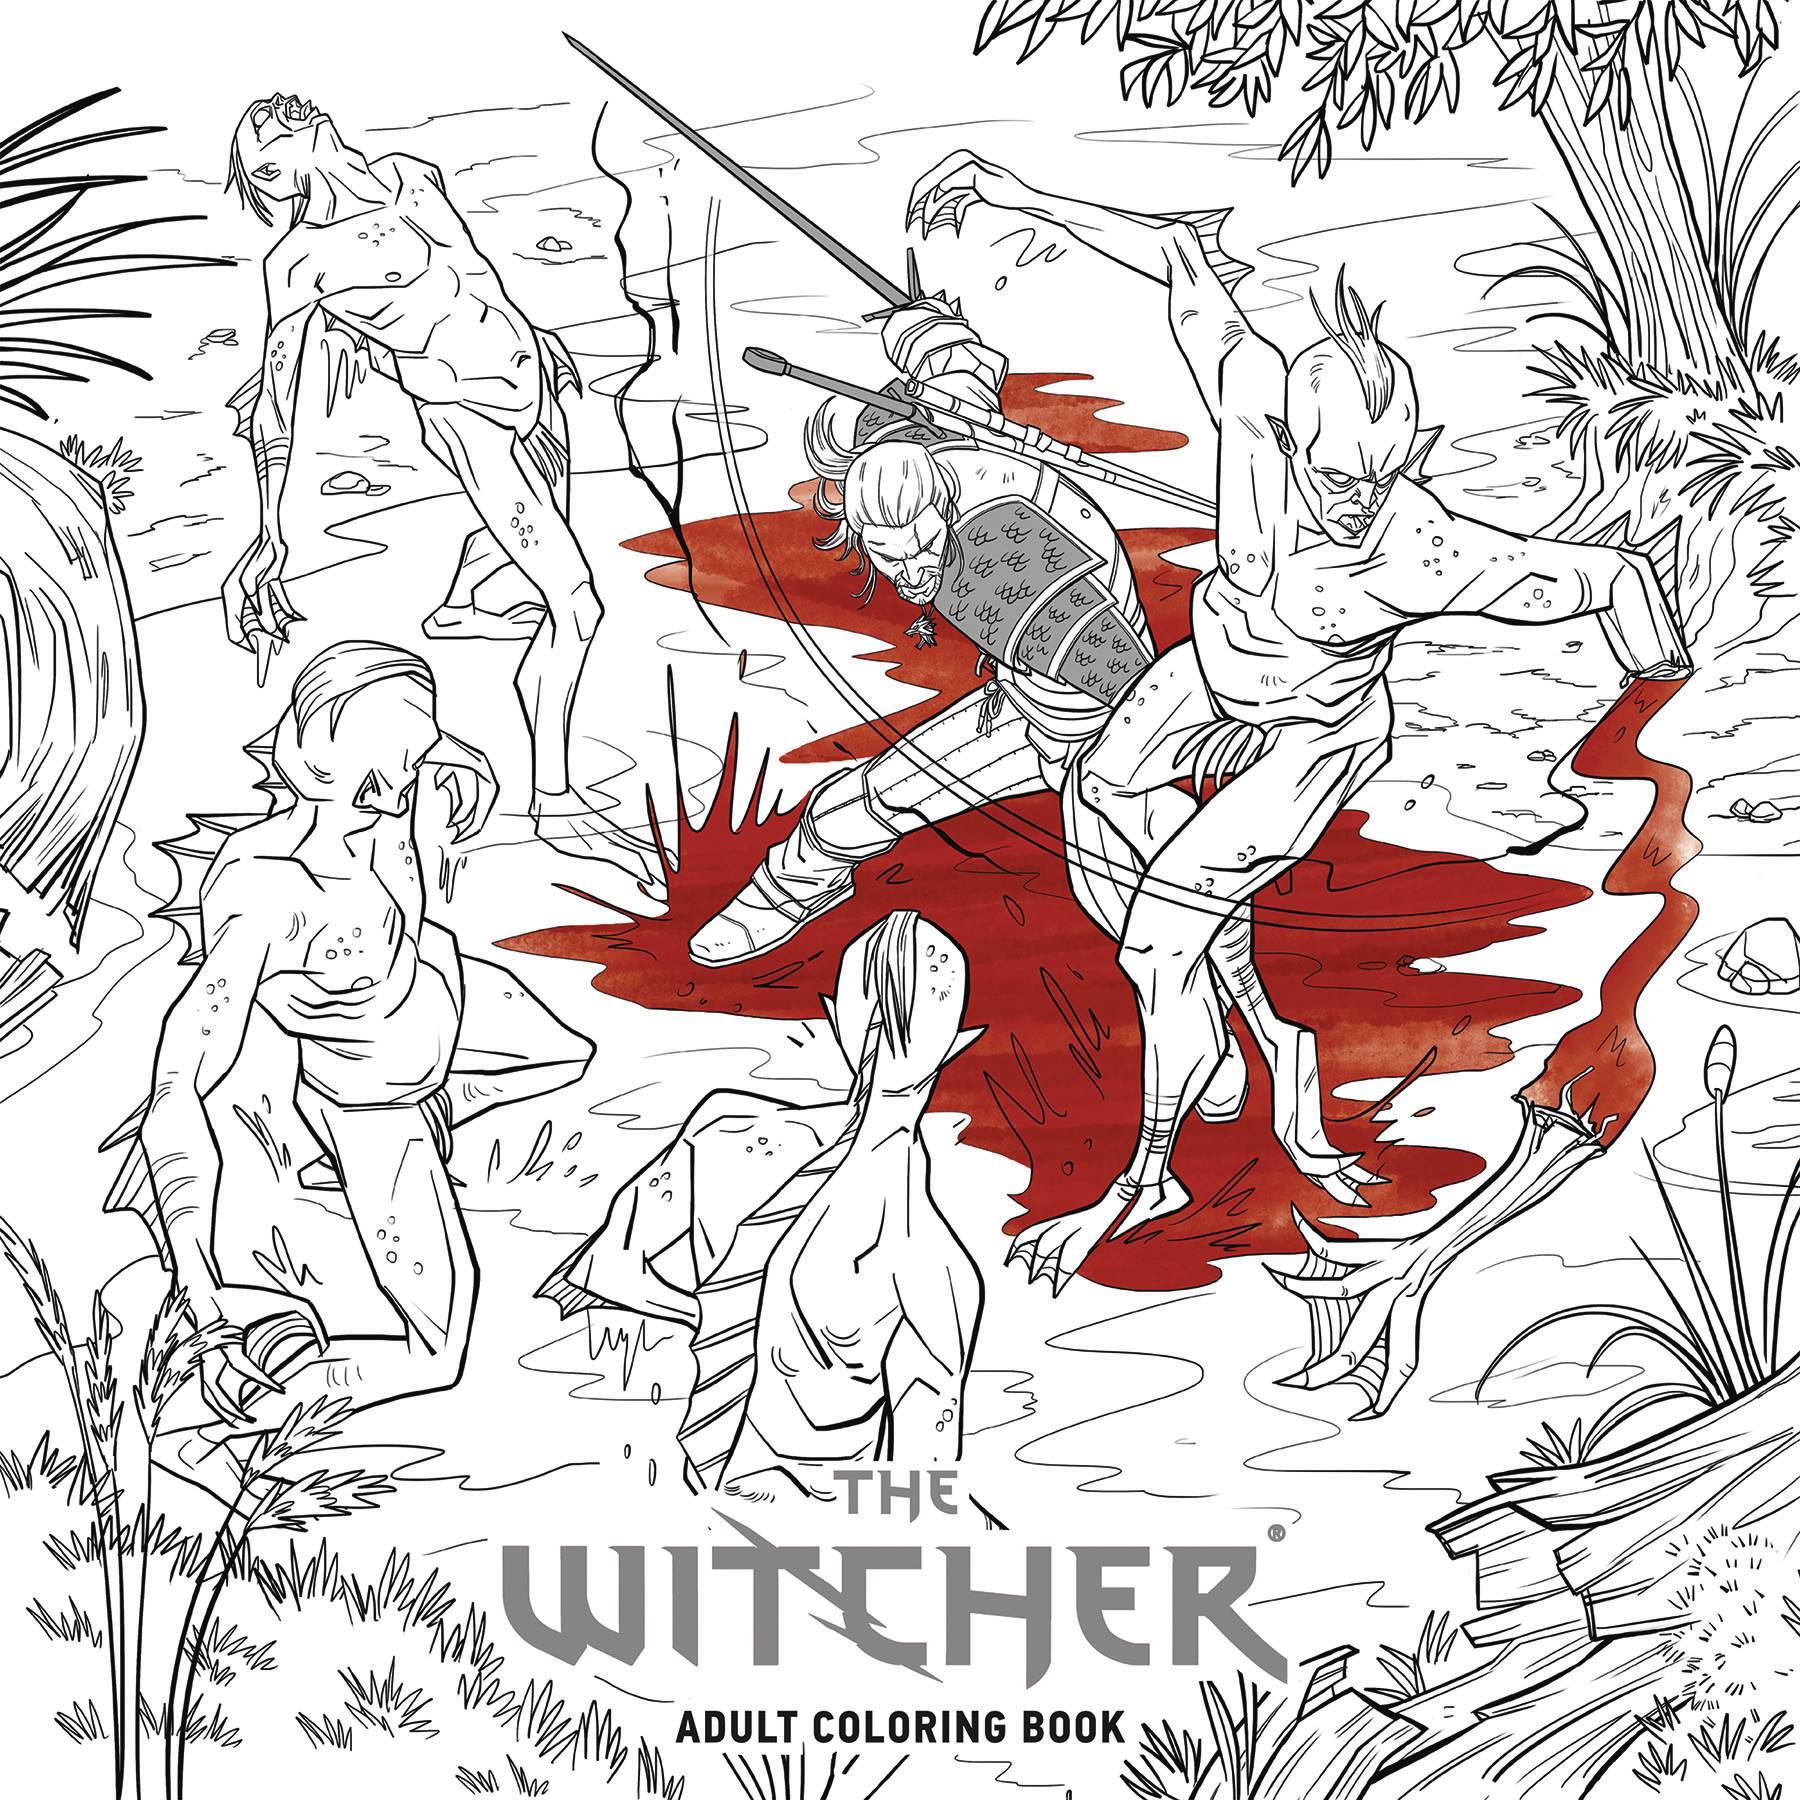 (USE AUG218859) WITCHER ADULT COLORING BOOK TP